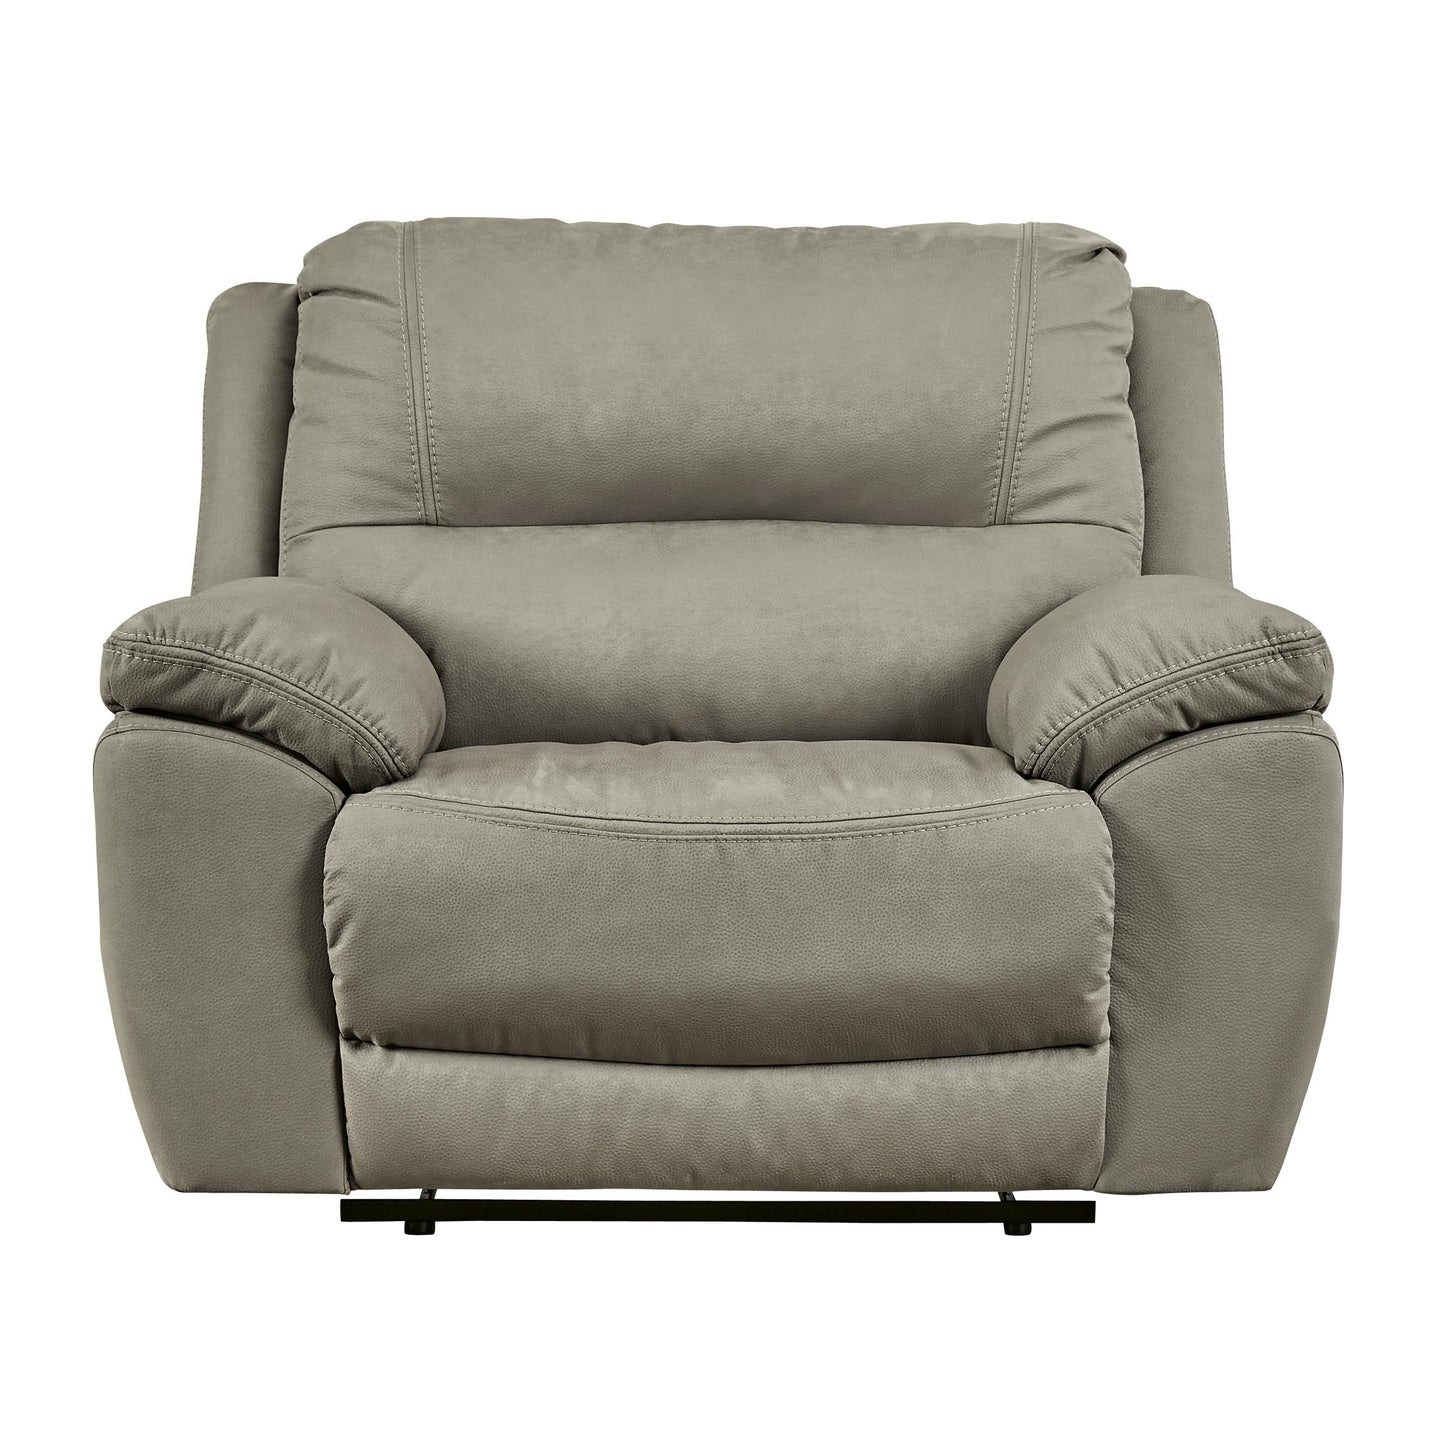 Signature Design by Ashley Next-Gen Gaucho Power Leather Look Recliner with Wall Recline 5420382 IMAGE 3